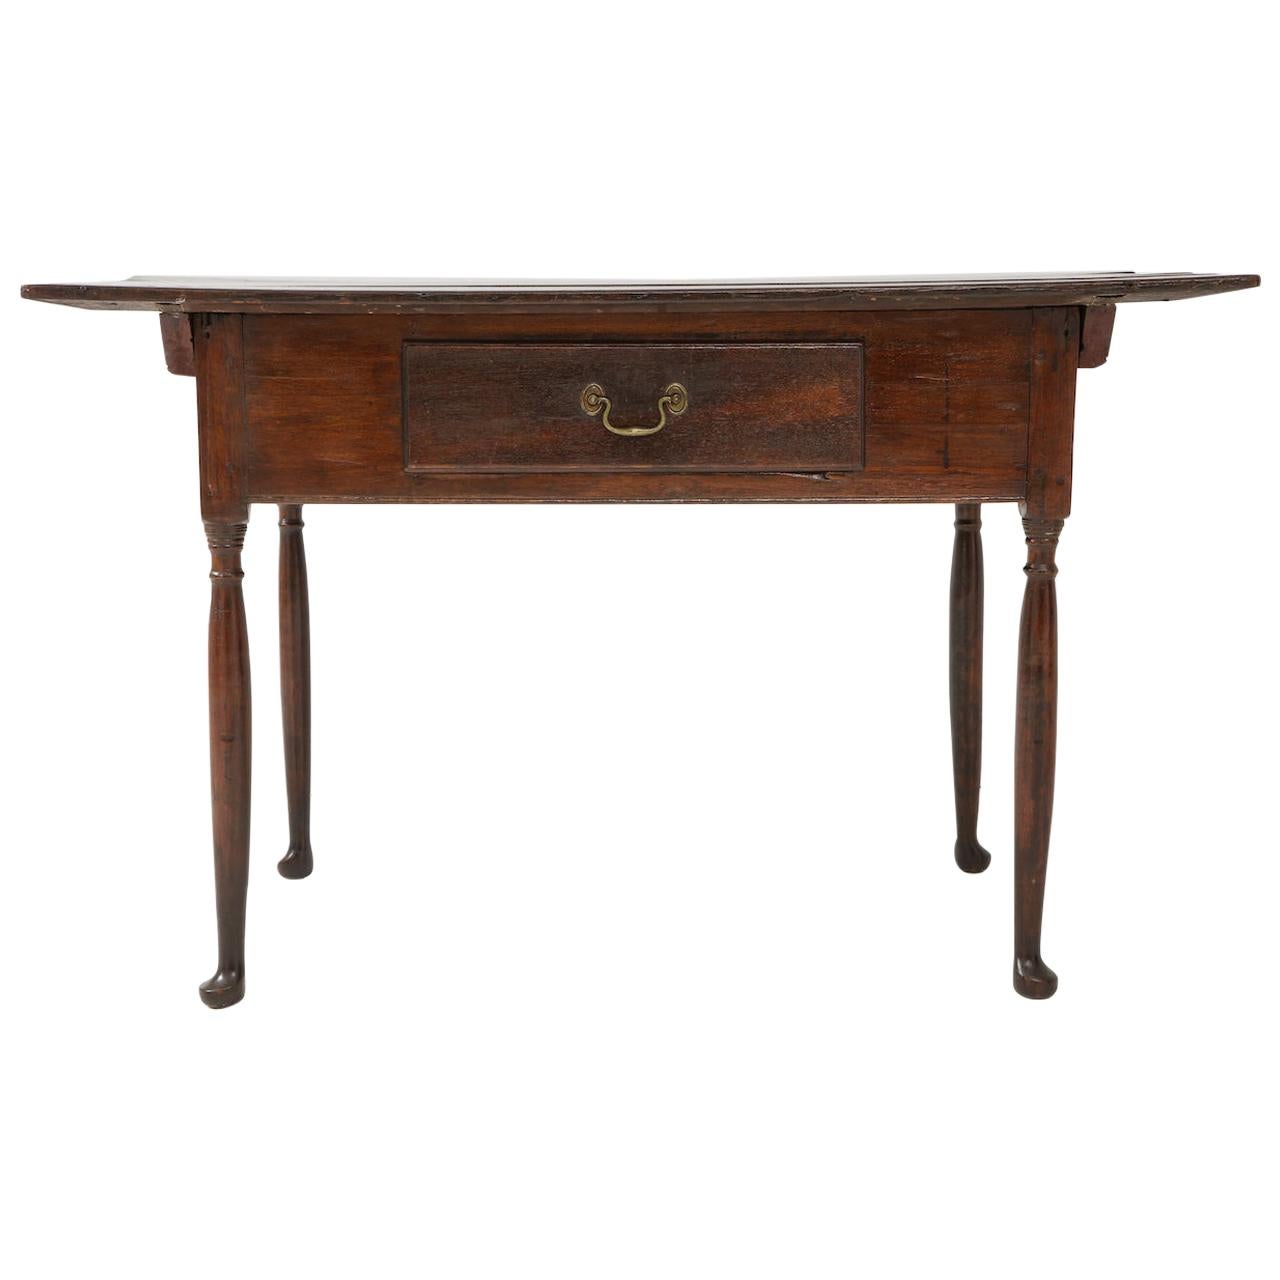 18th Century Pennsylvania Dutch Table with Drawer